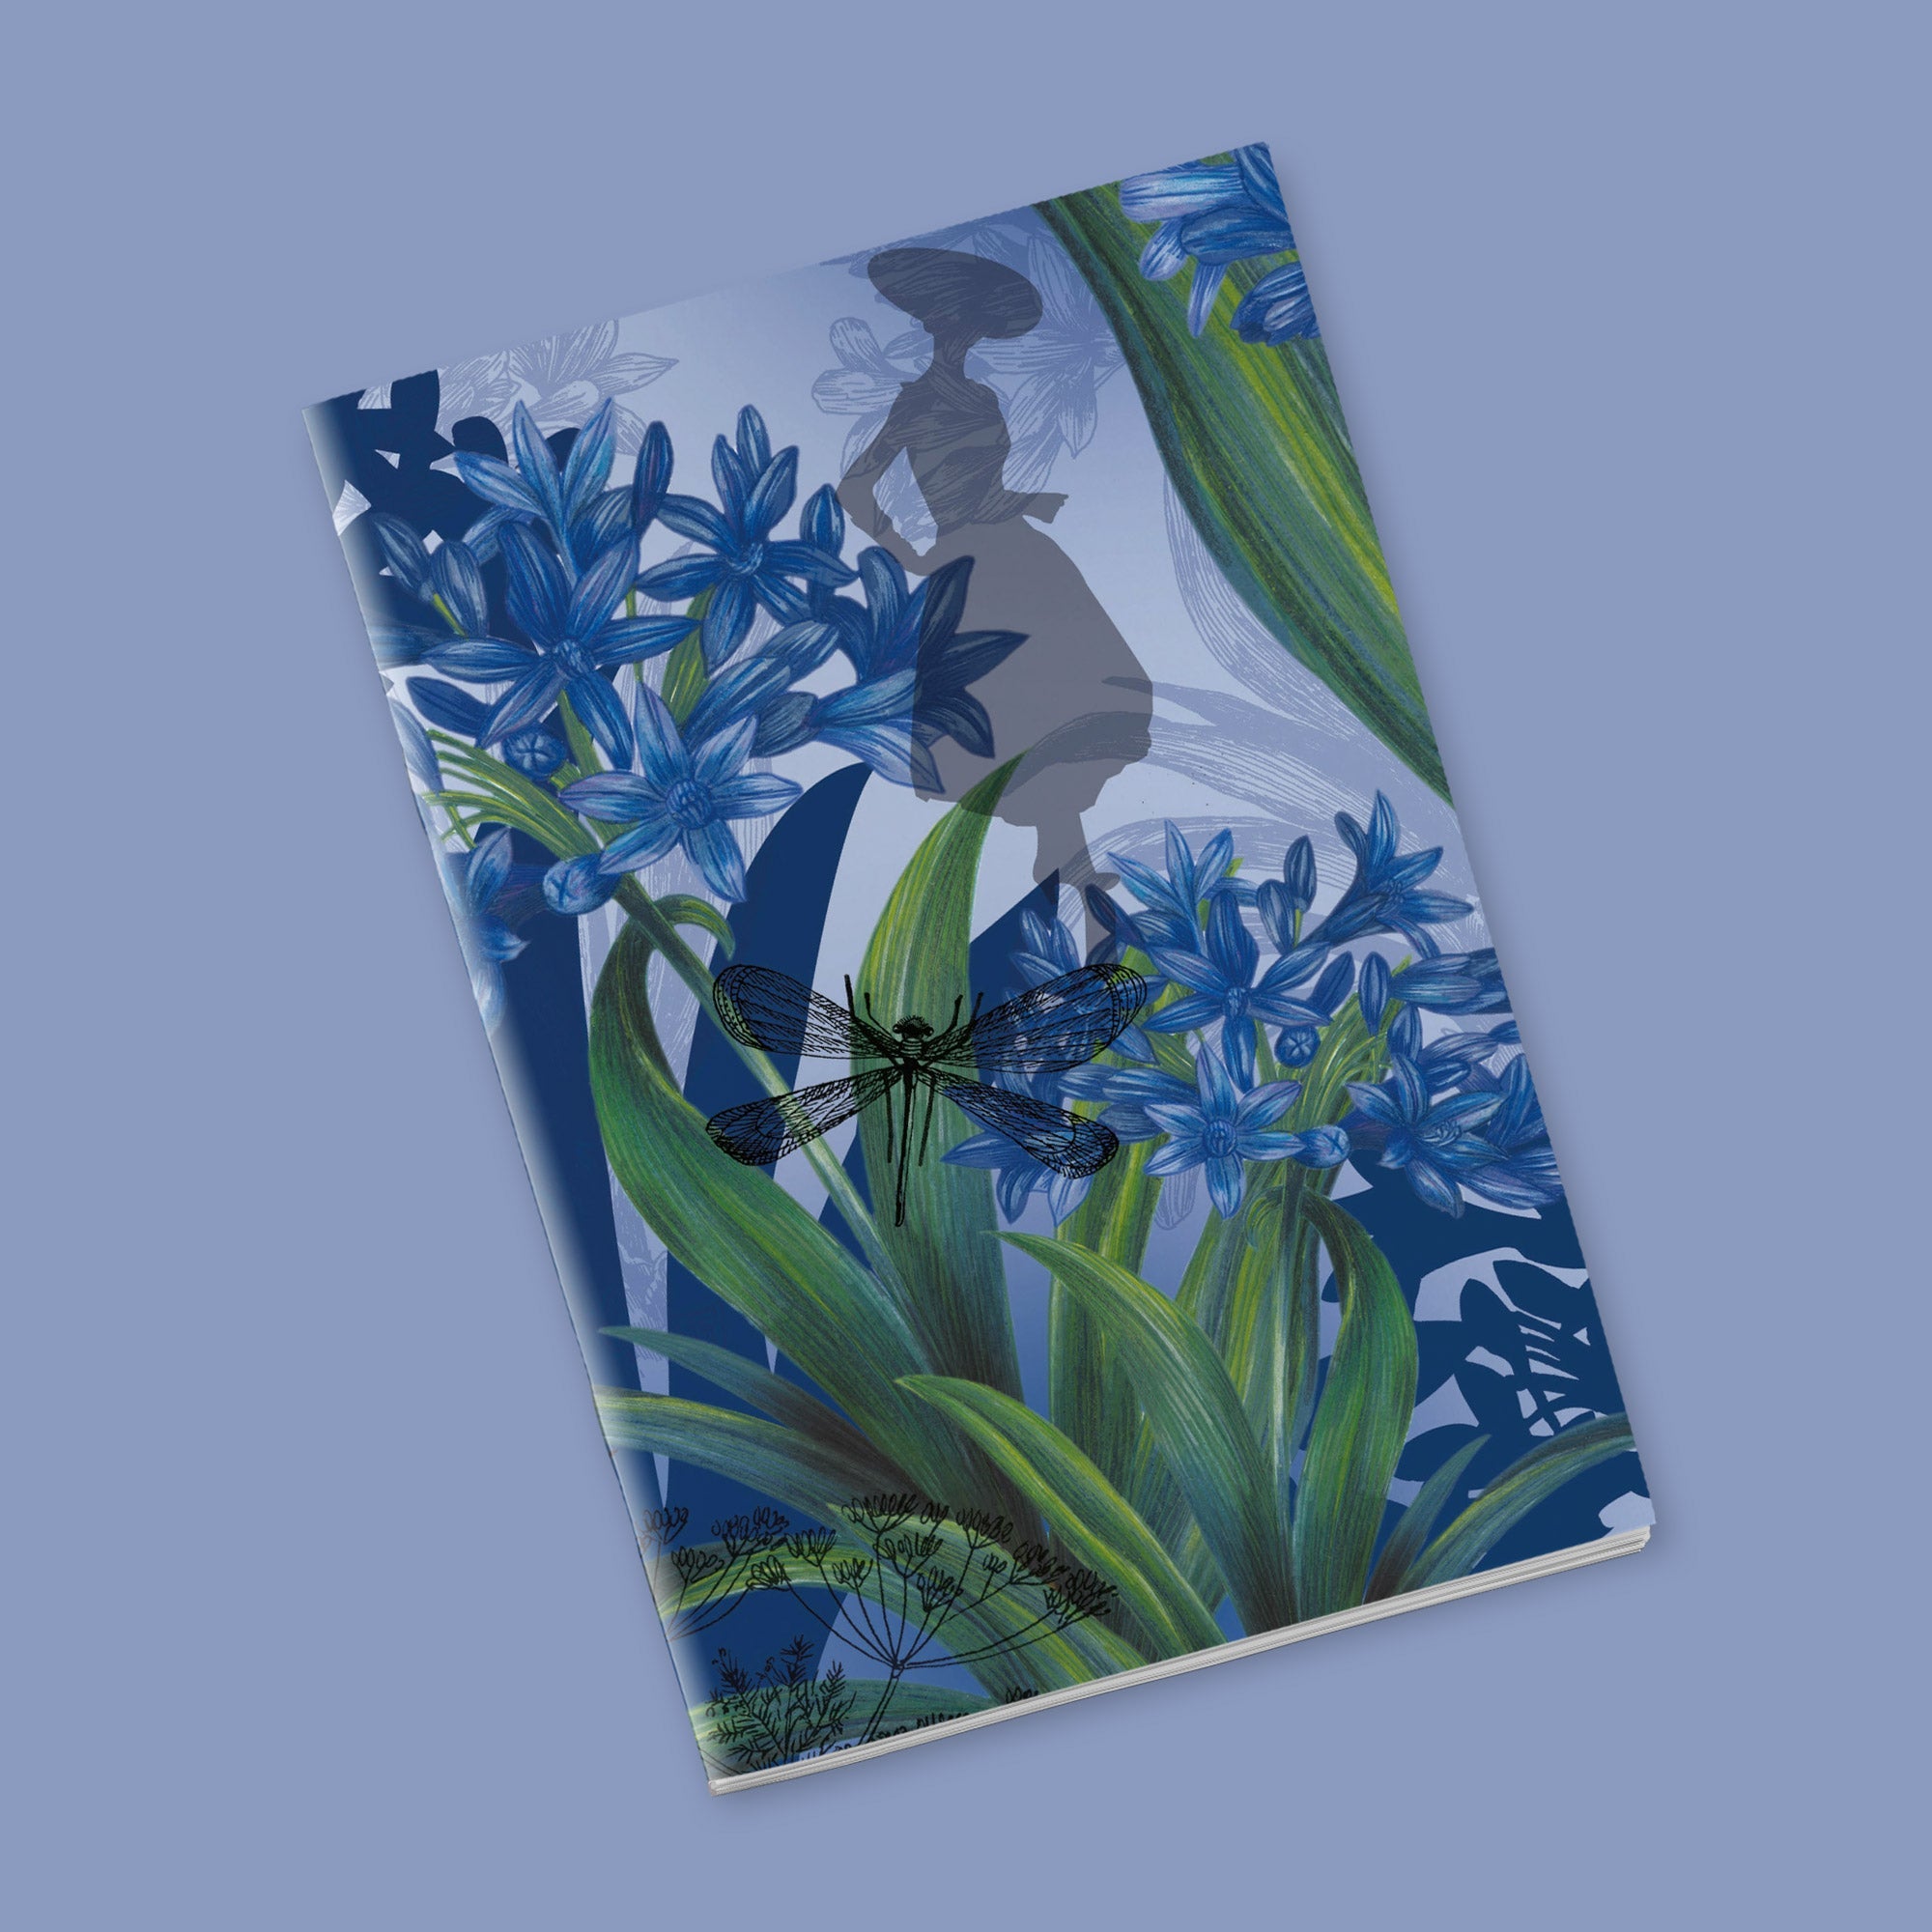 Small notebook - Suzy and the Agapanthus